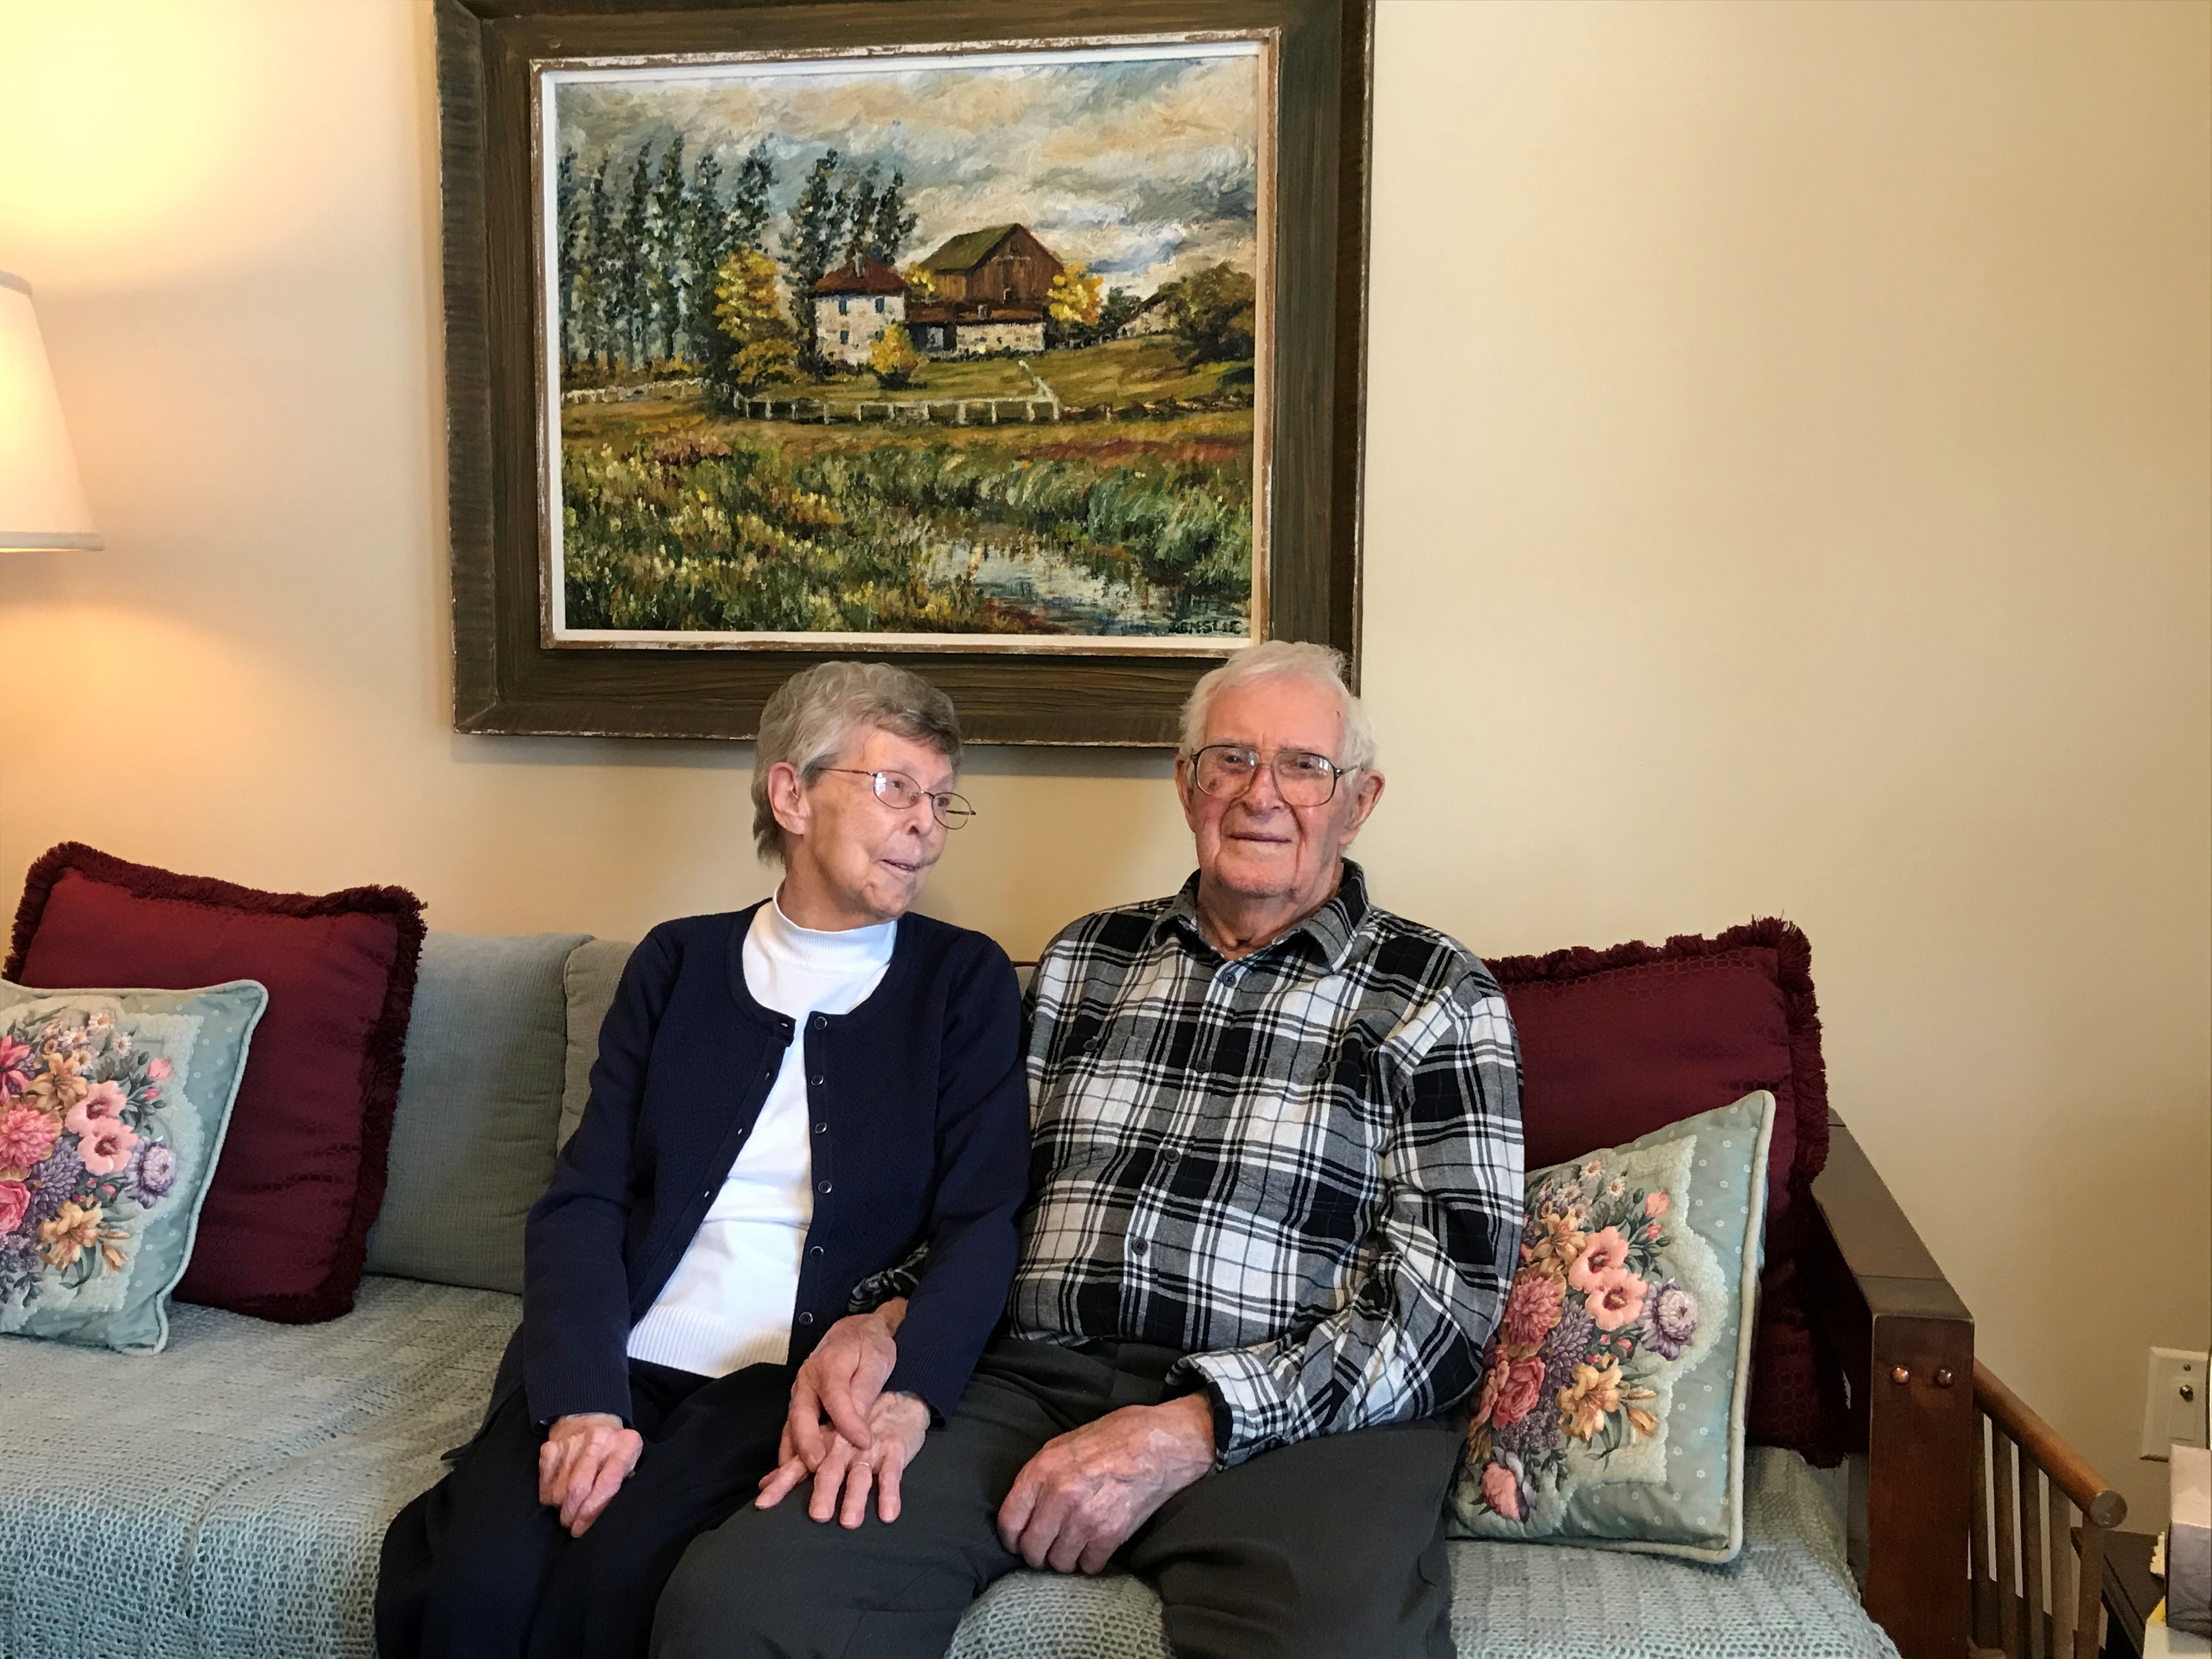 Jean and warren sit together in their suite at Riverside Glen.